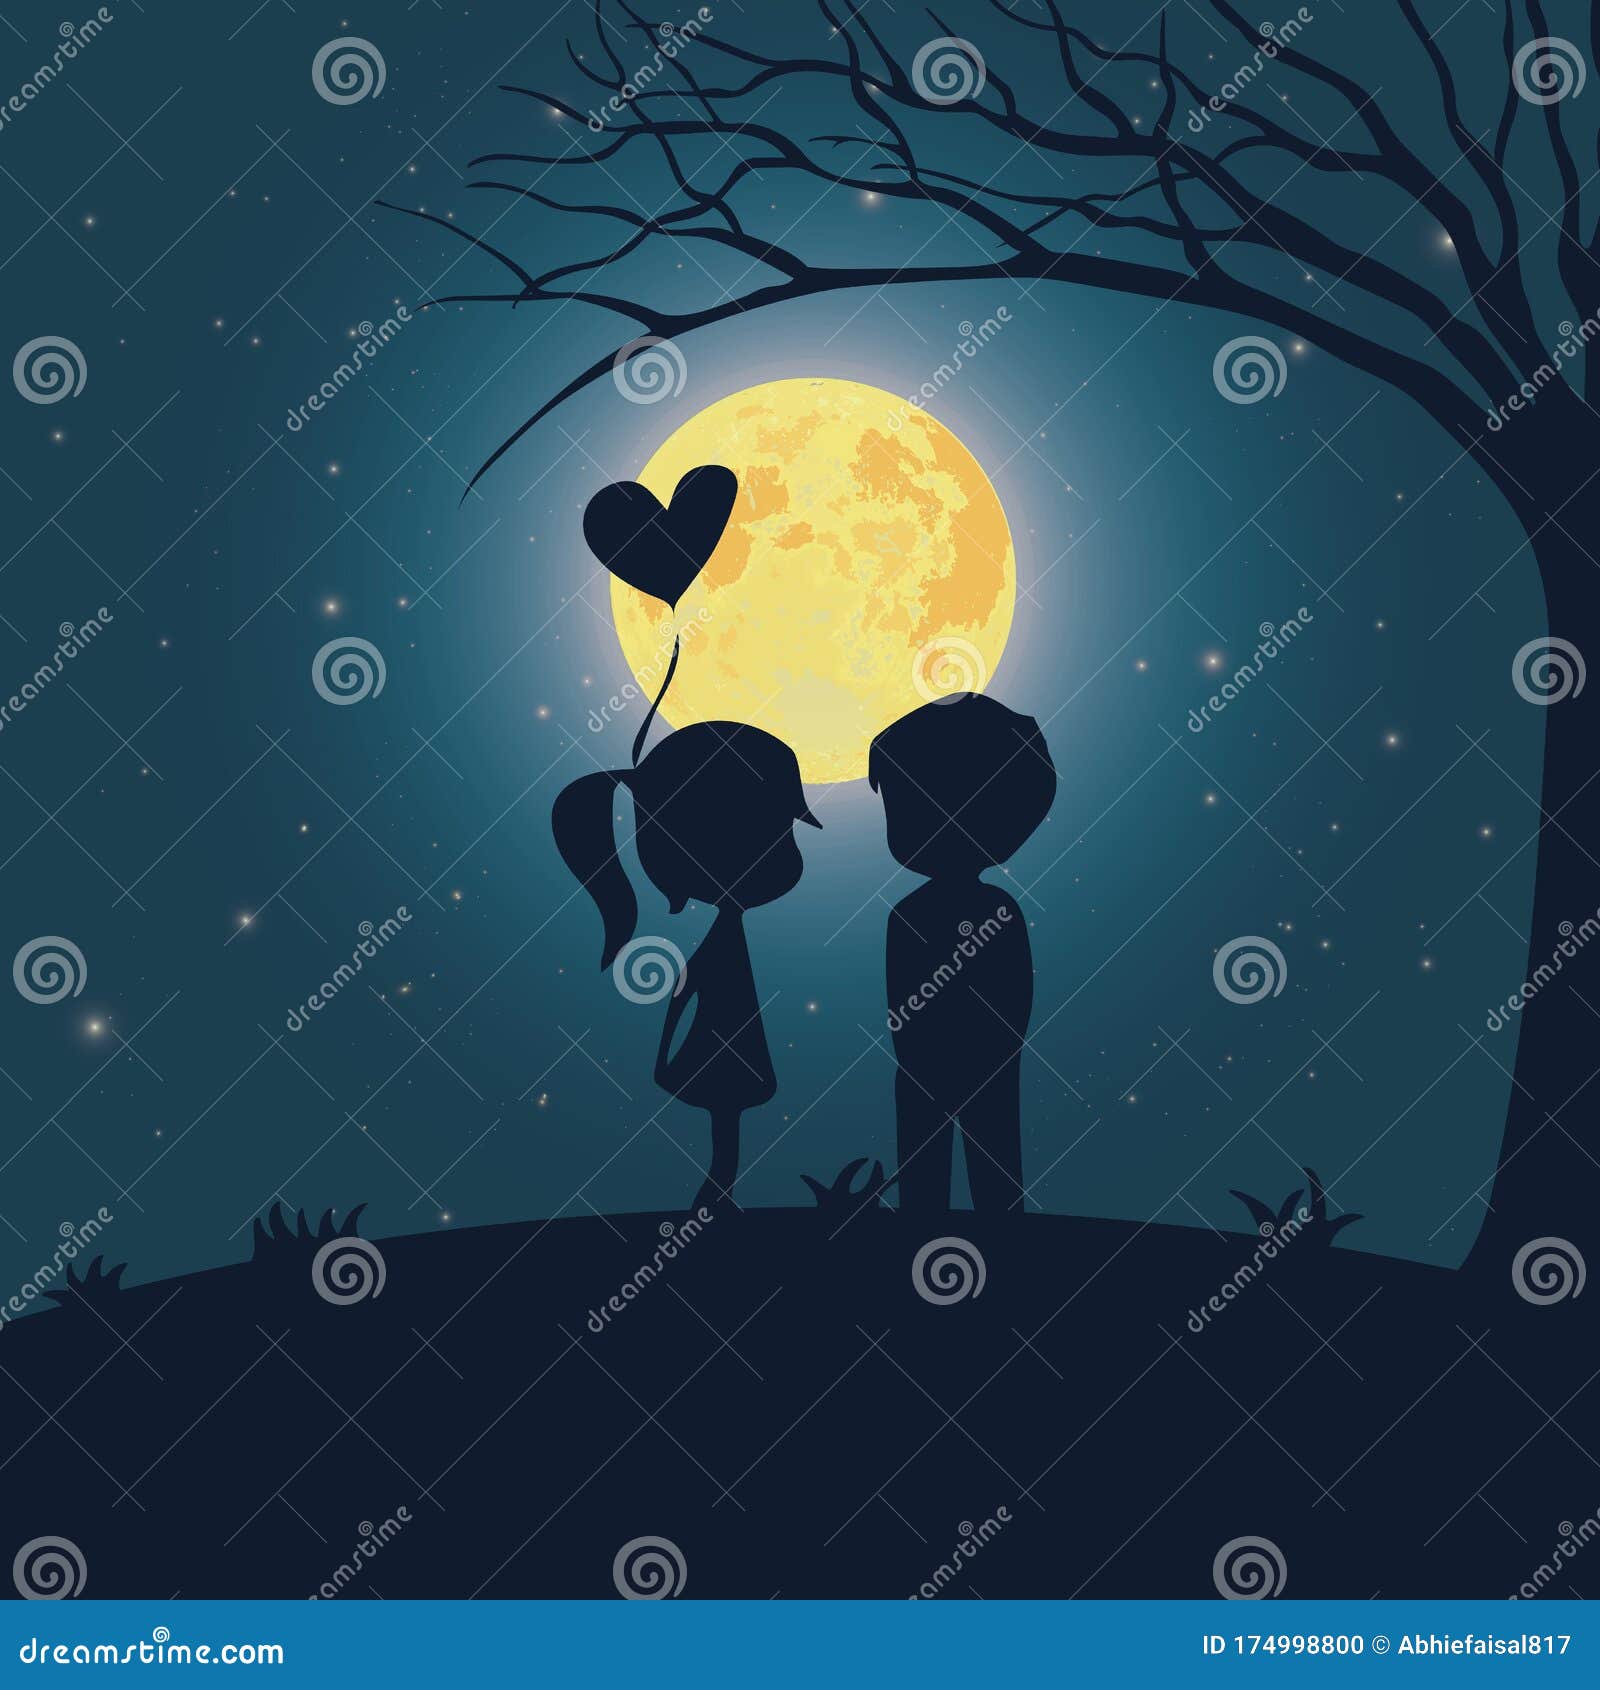 Cute Kids Couple Romantic Silhouette with Full Moon in the Night Cartoon  Vector Illustration Stock Vector - Illustration of abstract, dark: 174998800